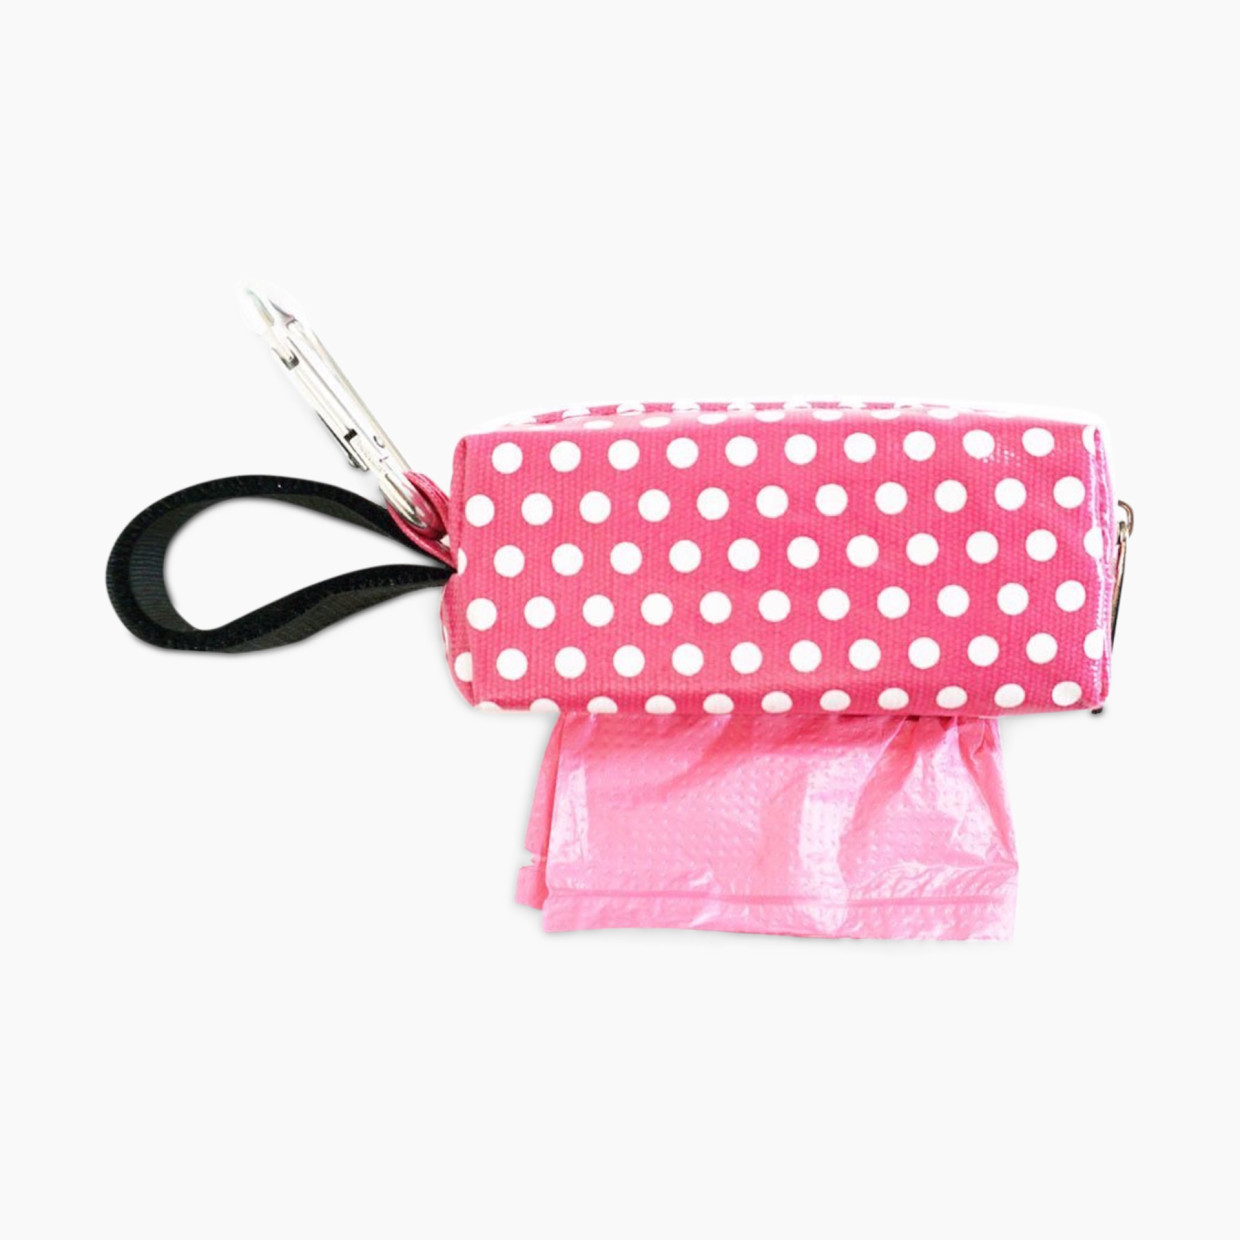 Oh Baby Bags Portable Diaper Bag Dispenser - Pink/White Dots, 48.